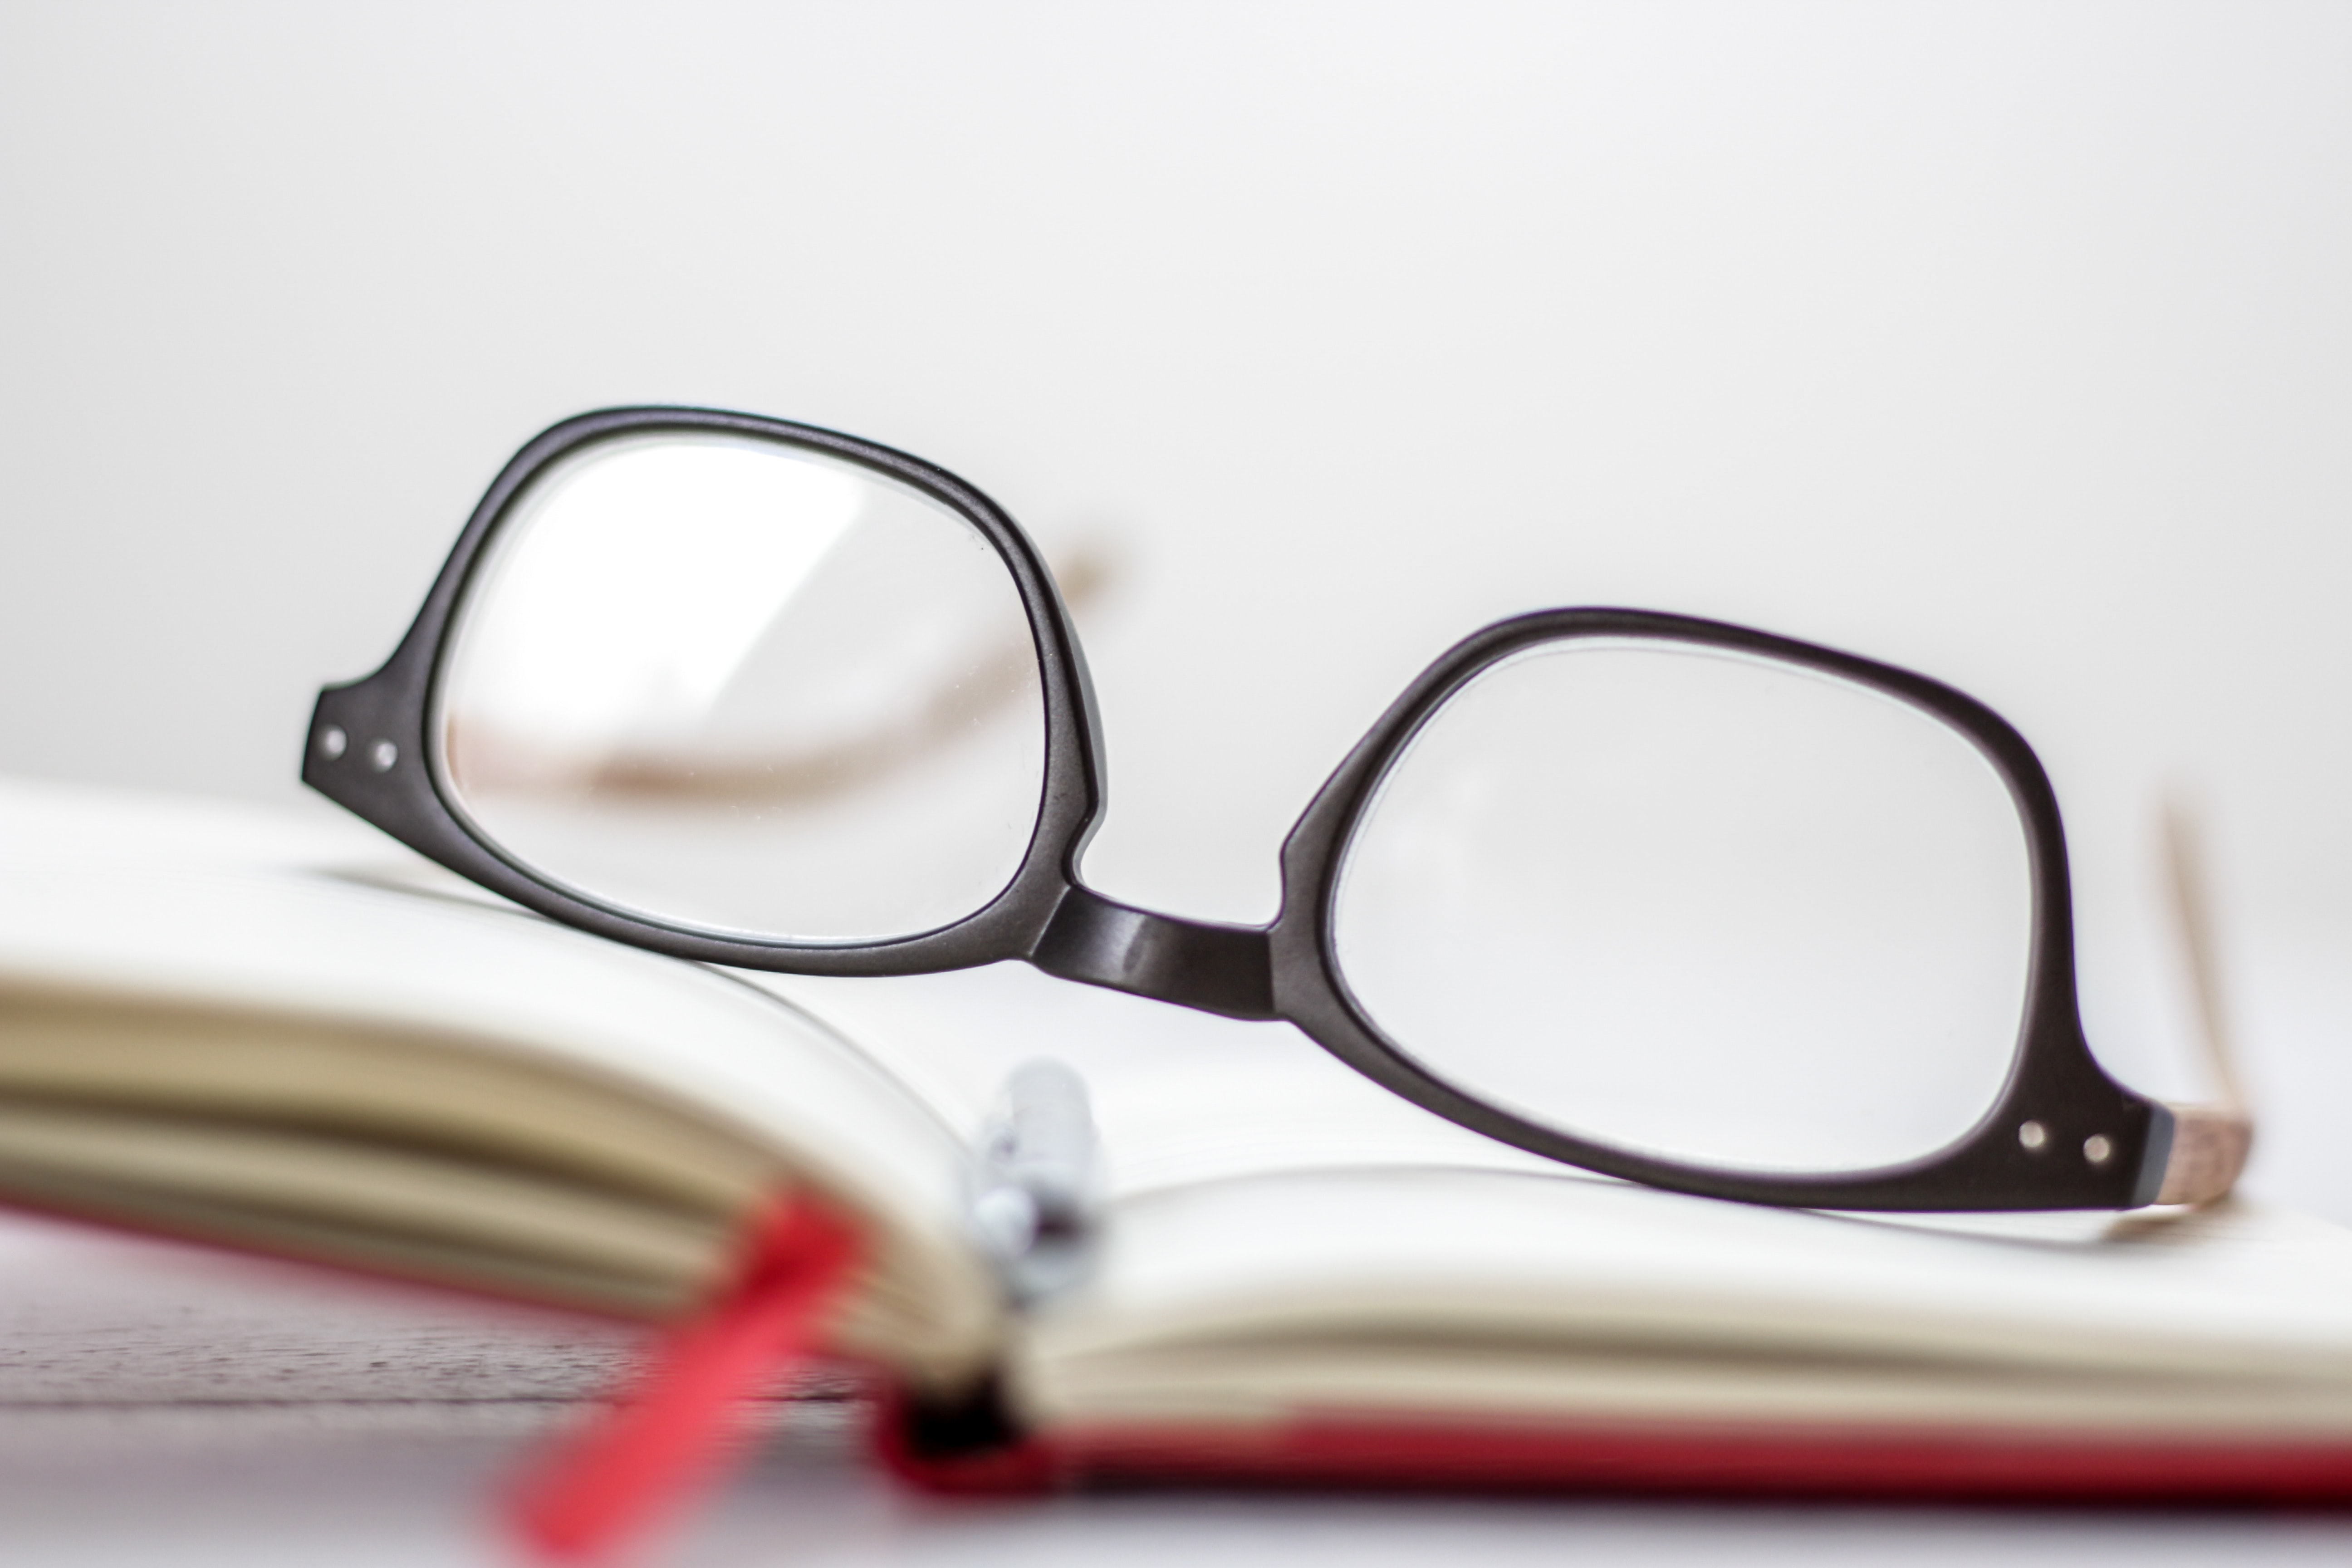 photo of a pair of eyeglasses resting on a book